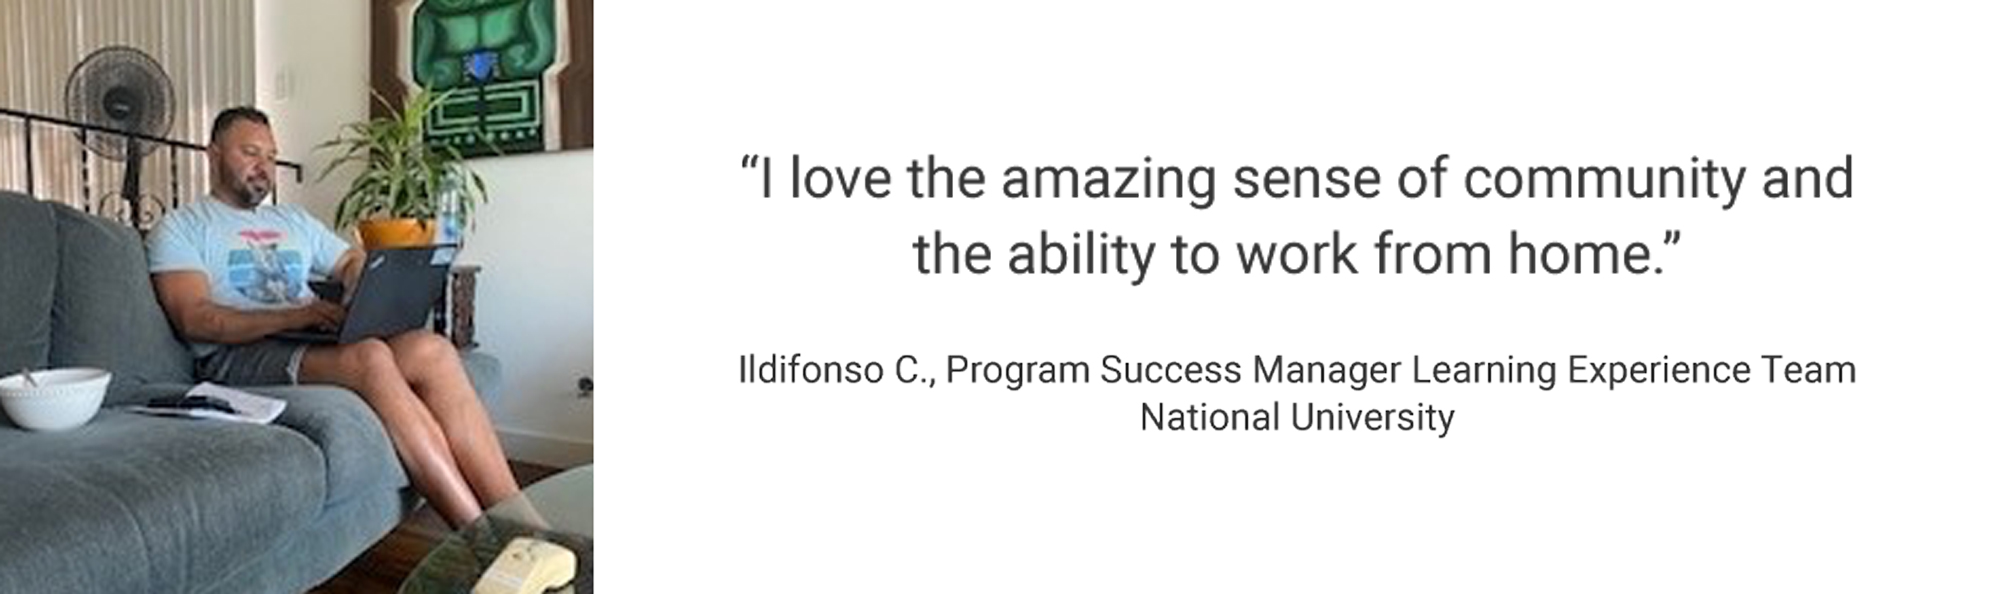 Employee Testimonial, "I love the amazing sense of community and the ability to work from home." Ildifonso C. Program Success Manager Learning Experience Team National University